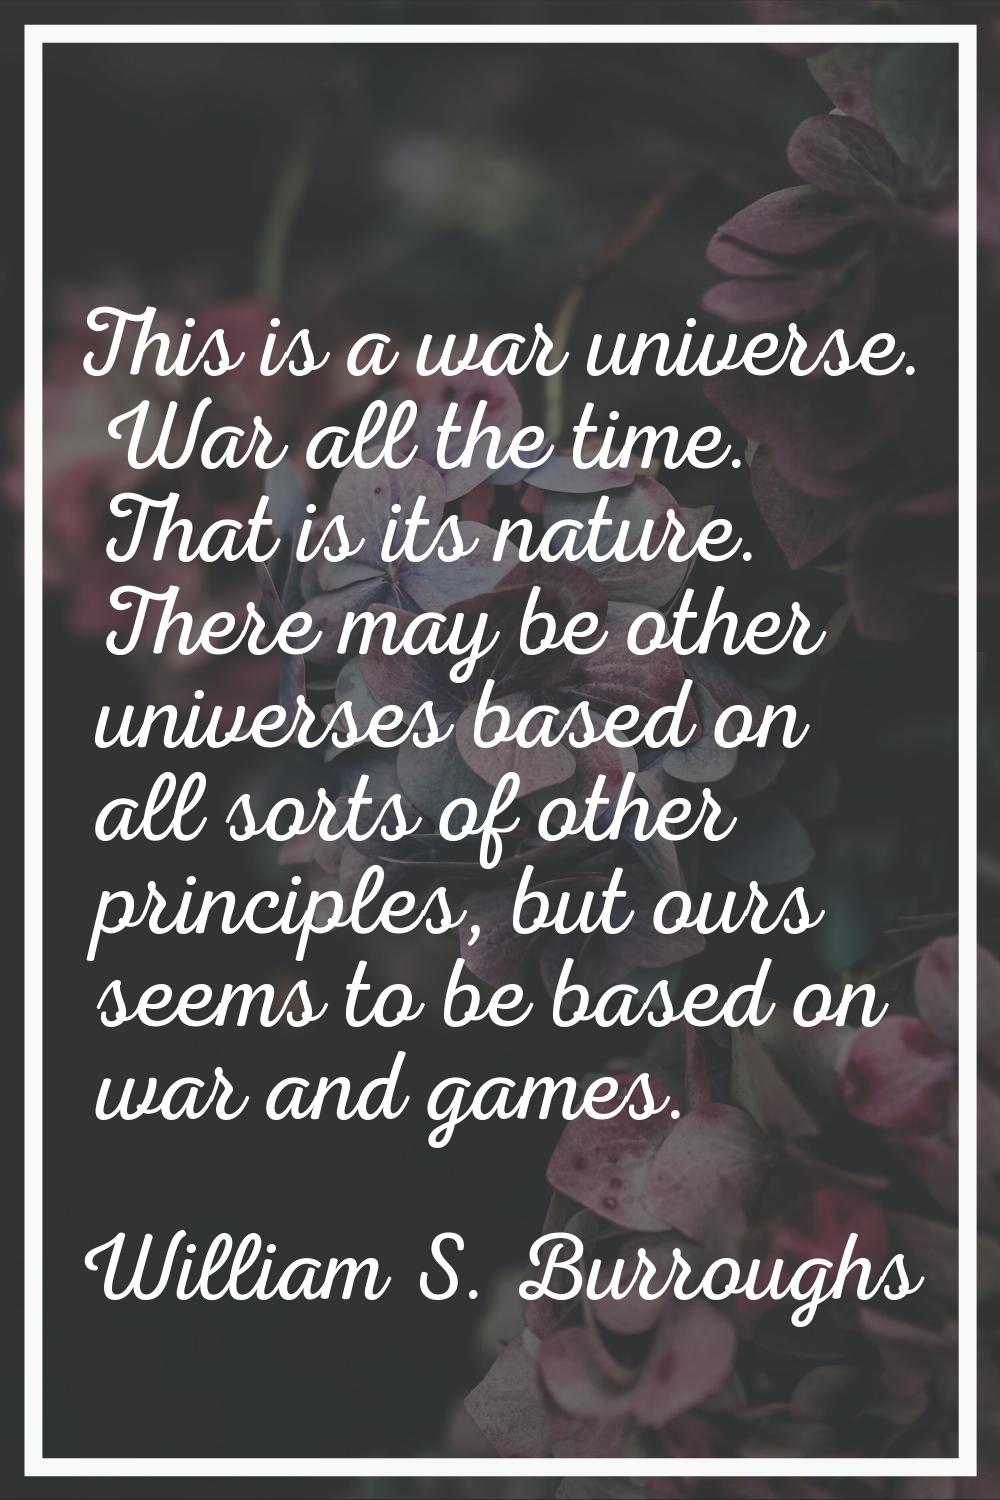 This is a war universe. War all the time. That is its nature. There may be other universes based on